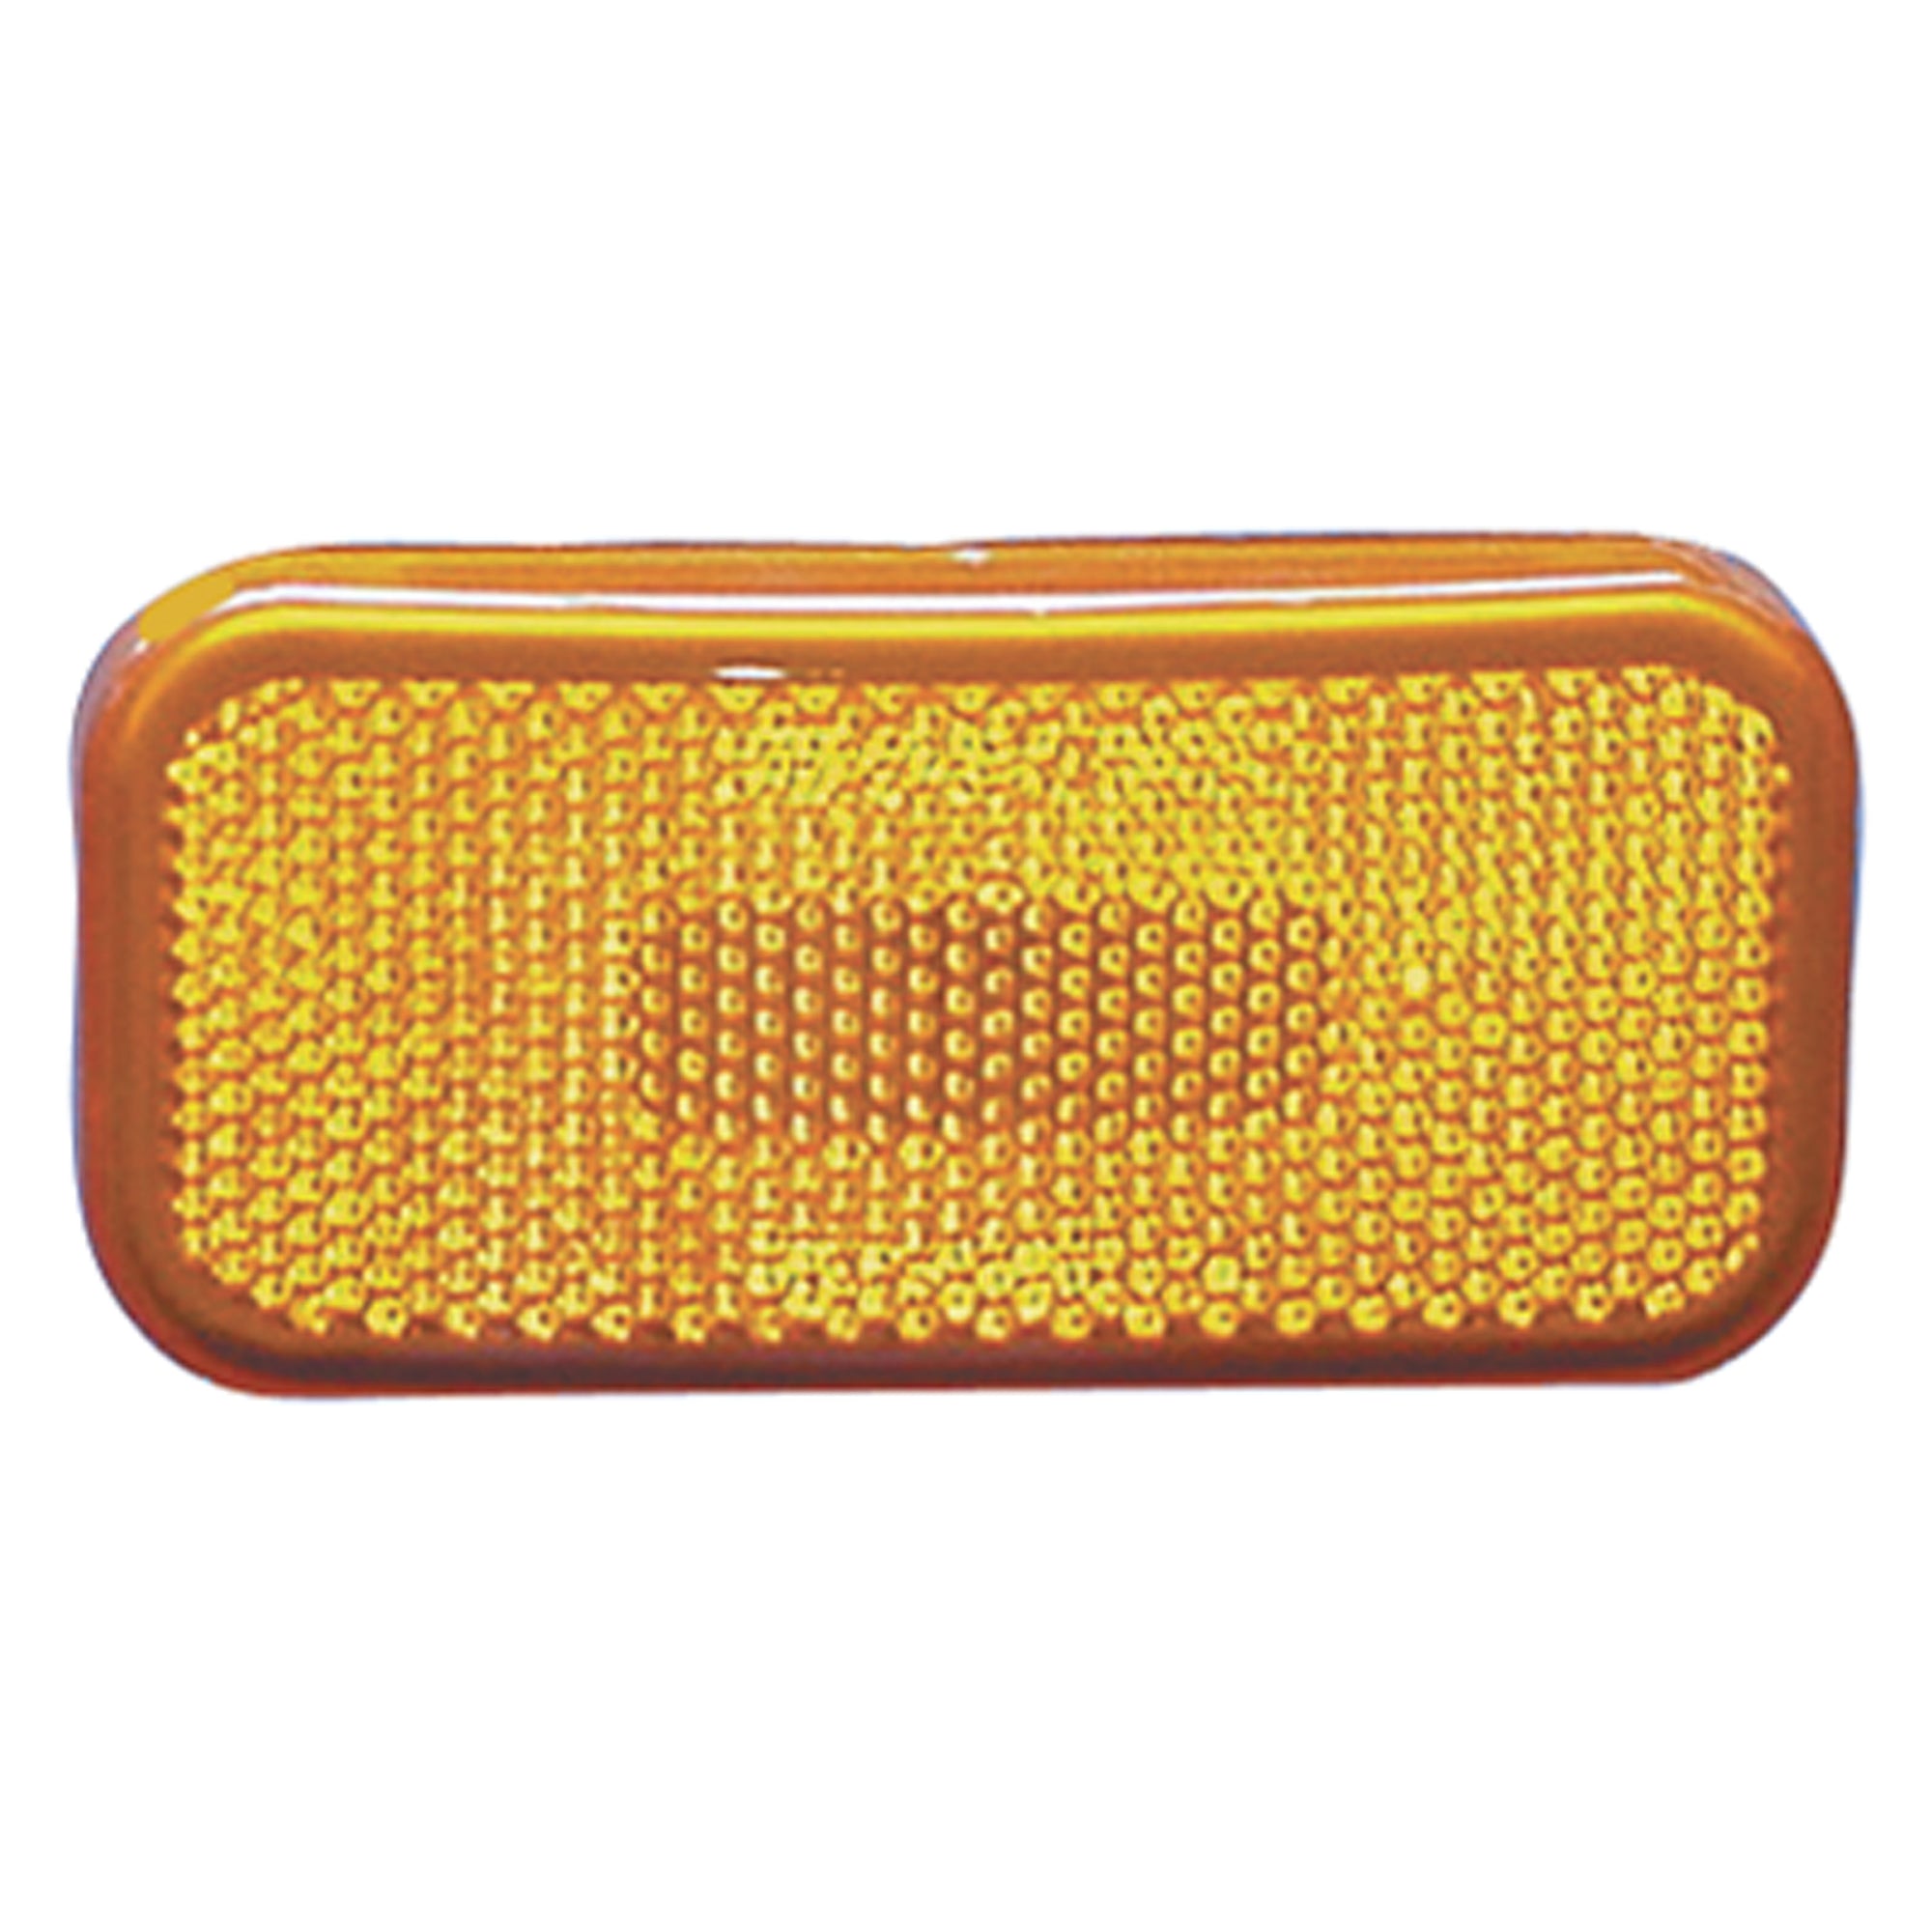 Fasteners Unlimited 003-59B Clearance Light Amber Rect 12V